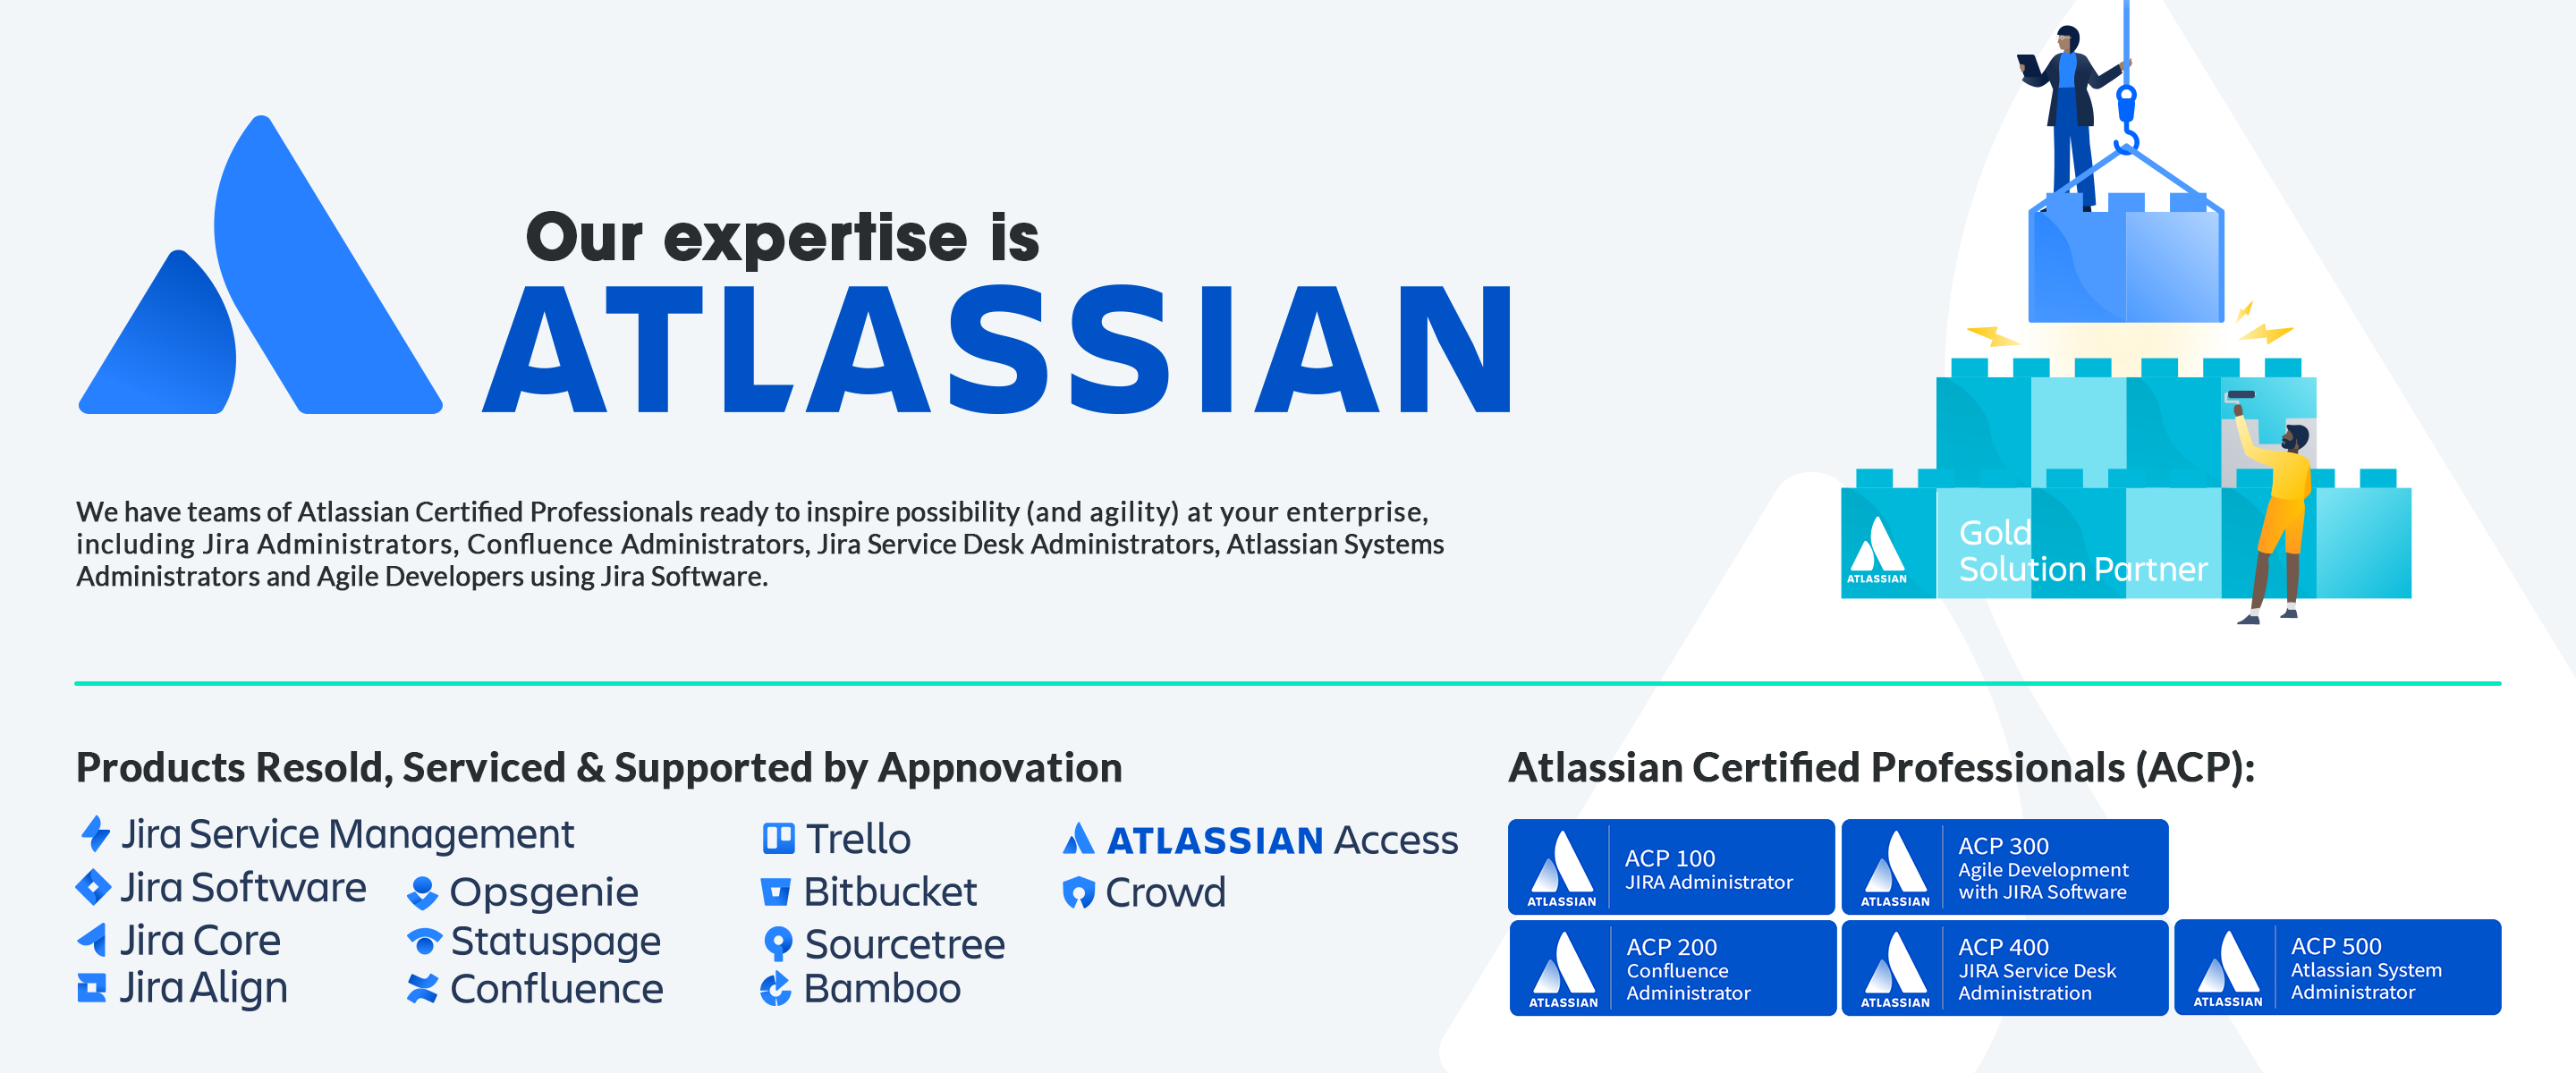 atlassian strategy, atlassian consulting services